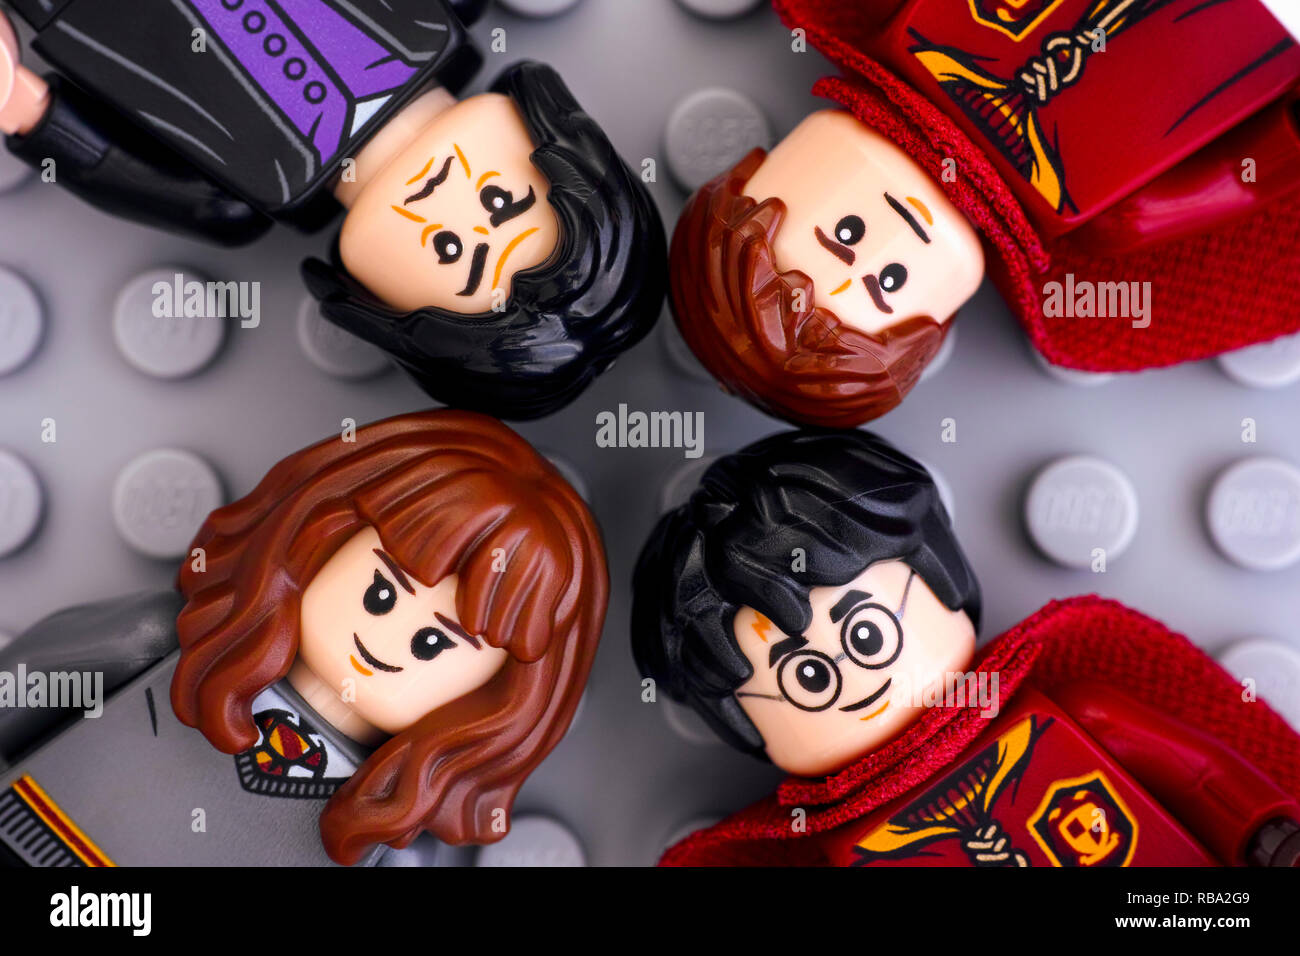 Tambov, Russian Federation - January 06, 2019 Four Lego Harry Potter minifigures - Harry Potter, Hermione Granger, Severus Snape and Oliver Wood Stock Photo